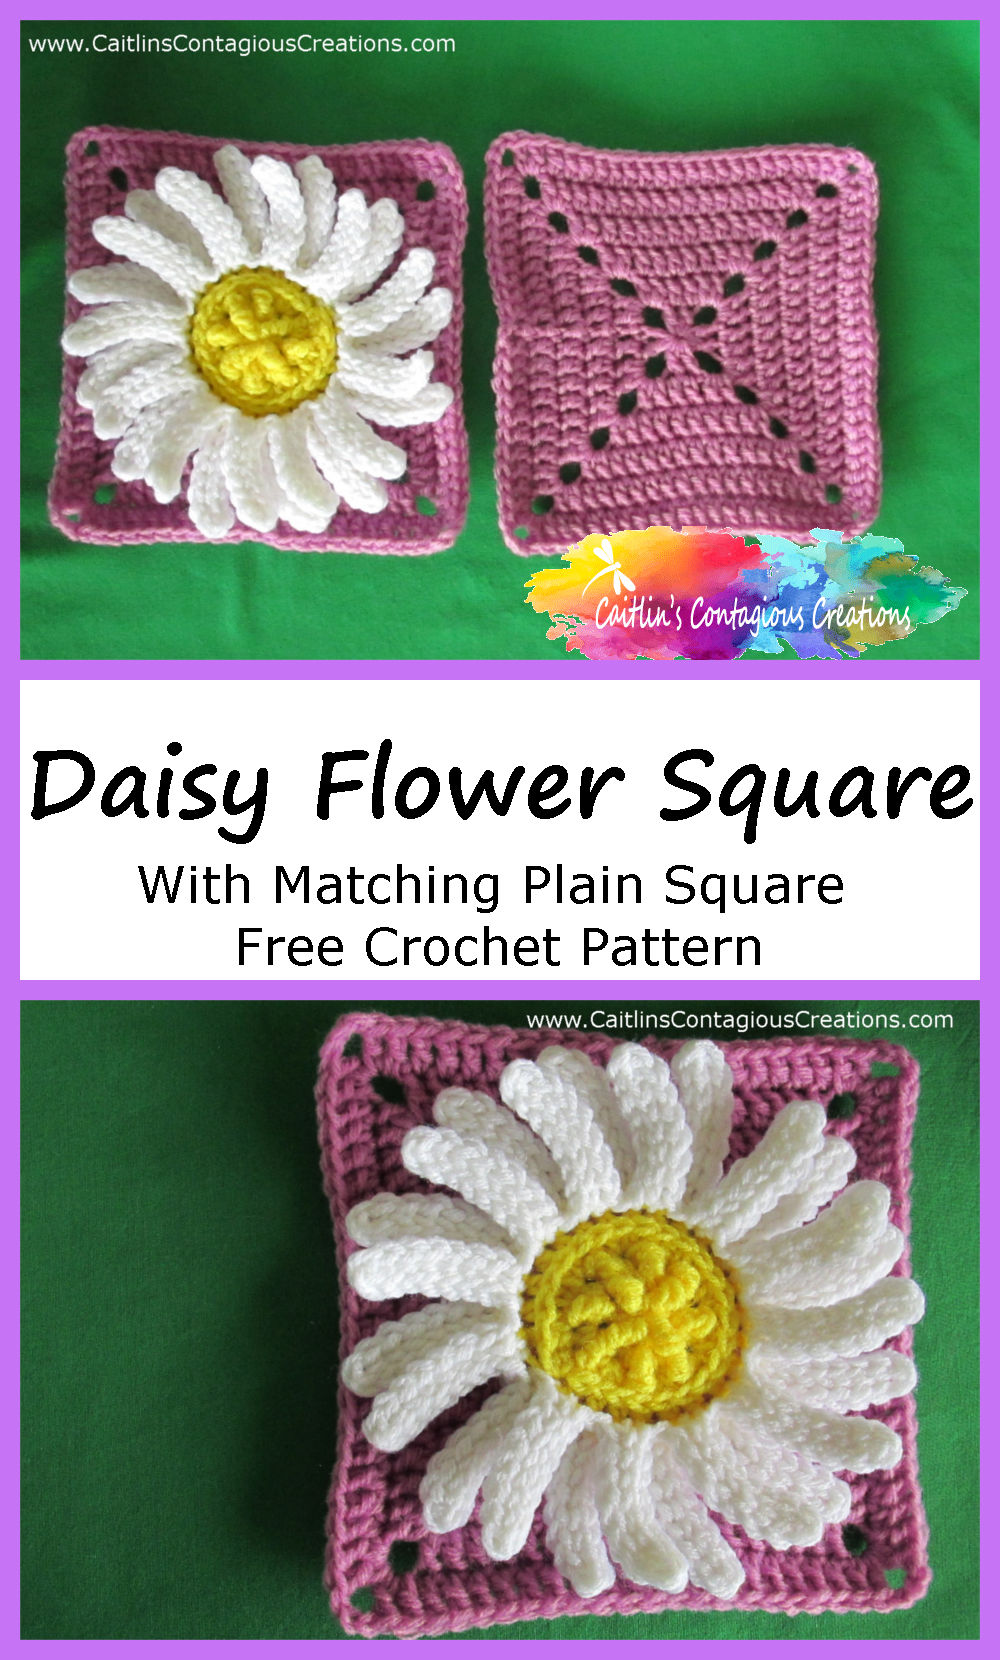 finished daisy, daisy square and plain square on green background with text overlay Daisy Square and matching plain square free crochet pattern